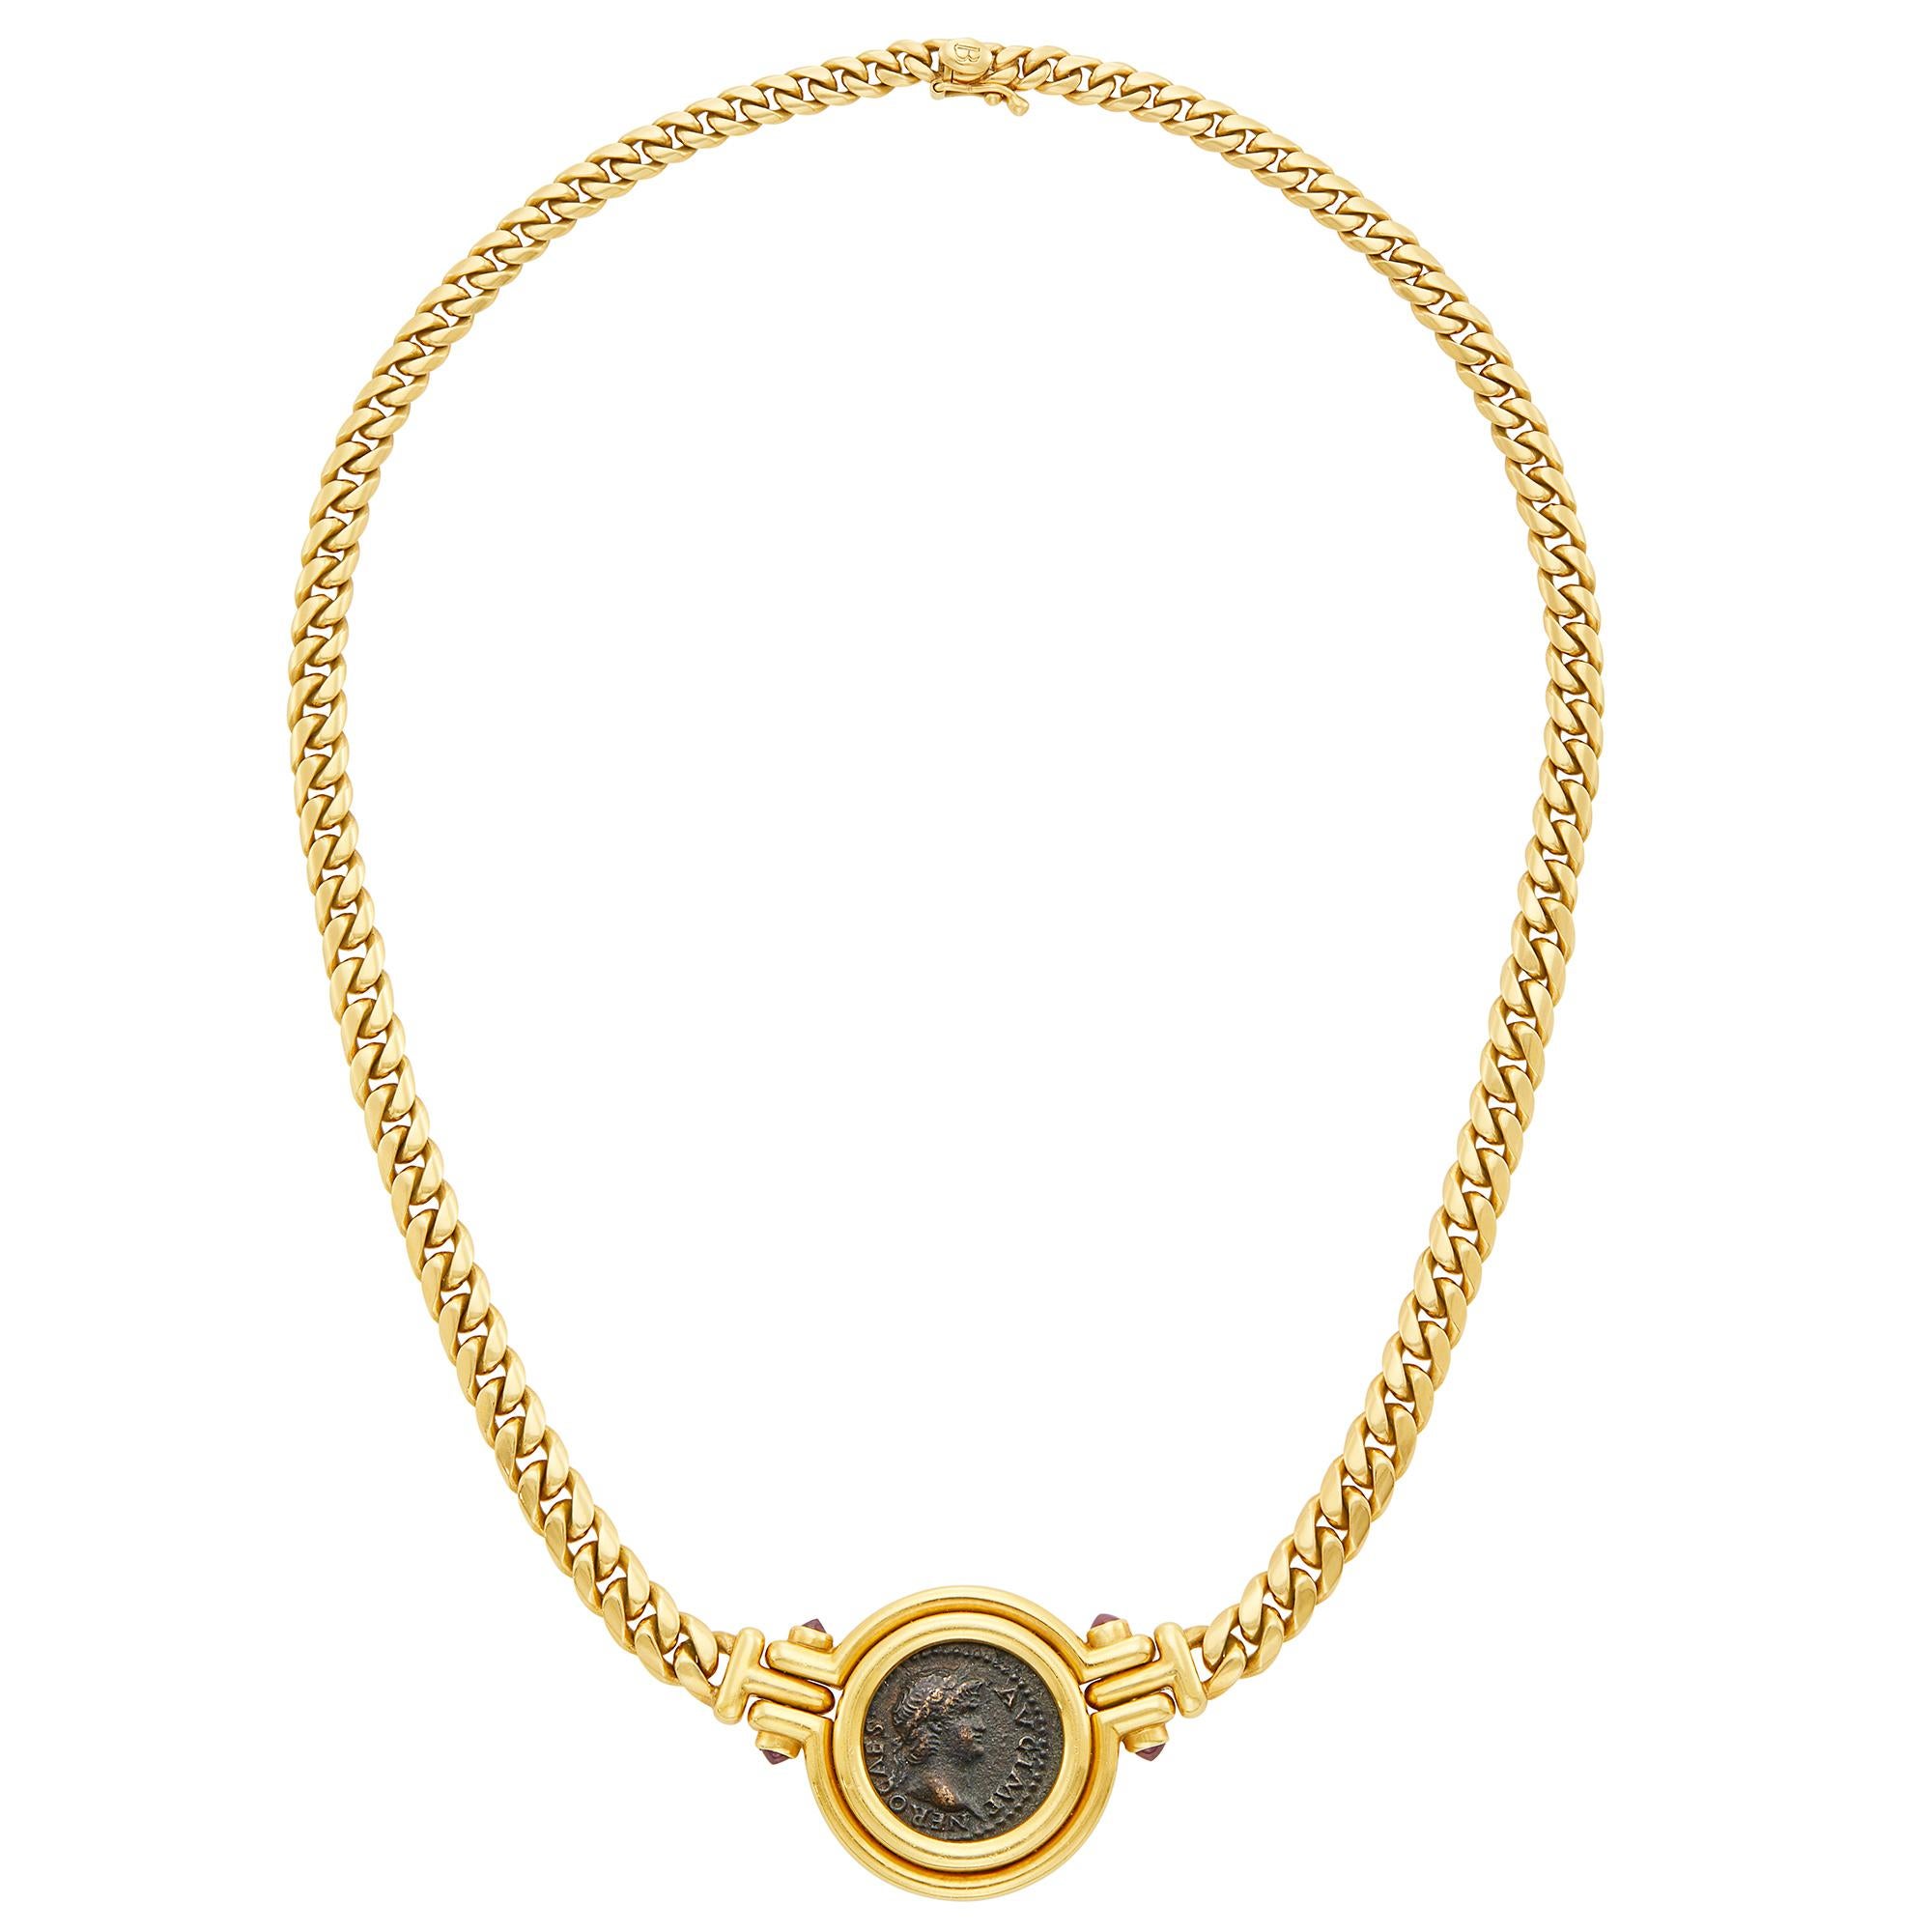 Bulgari Gold, Cabochon Ruby and Roman Coin 'Monete' Pendant-Necklace, Bulgari
18 kt., centering an ancient coin, engraved on reverse 'Roma-Nero 54-68', flanked by 4 round domed cabochon rubies, sustained by a curb link necklace. Made in Italy, circa